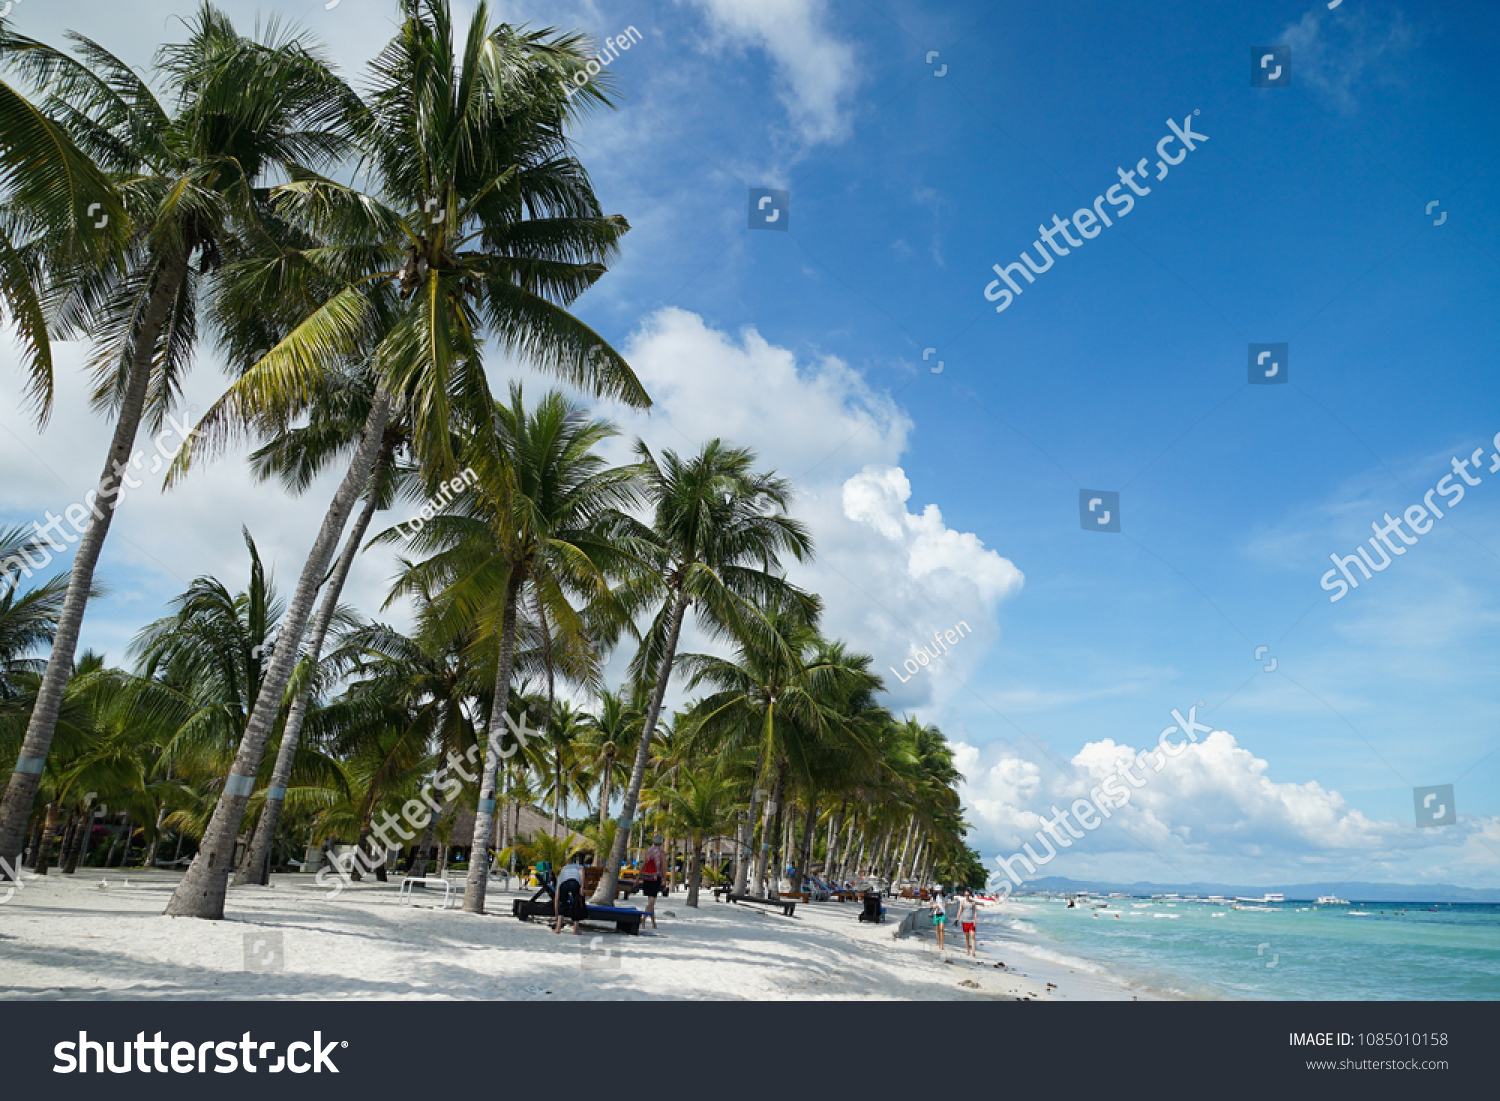 Palm trees on the beach, the island of the Philippines #1085010158